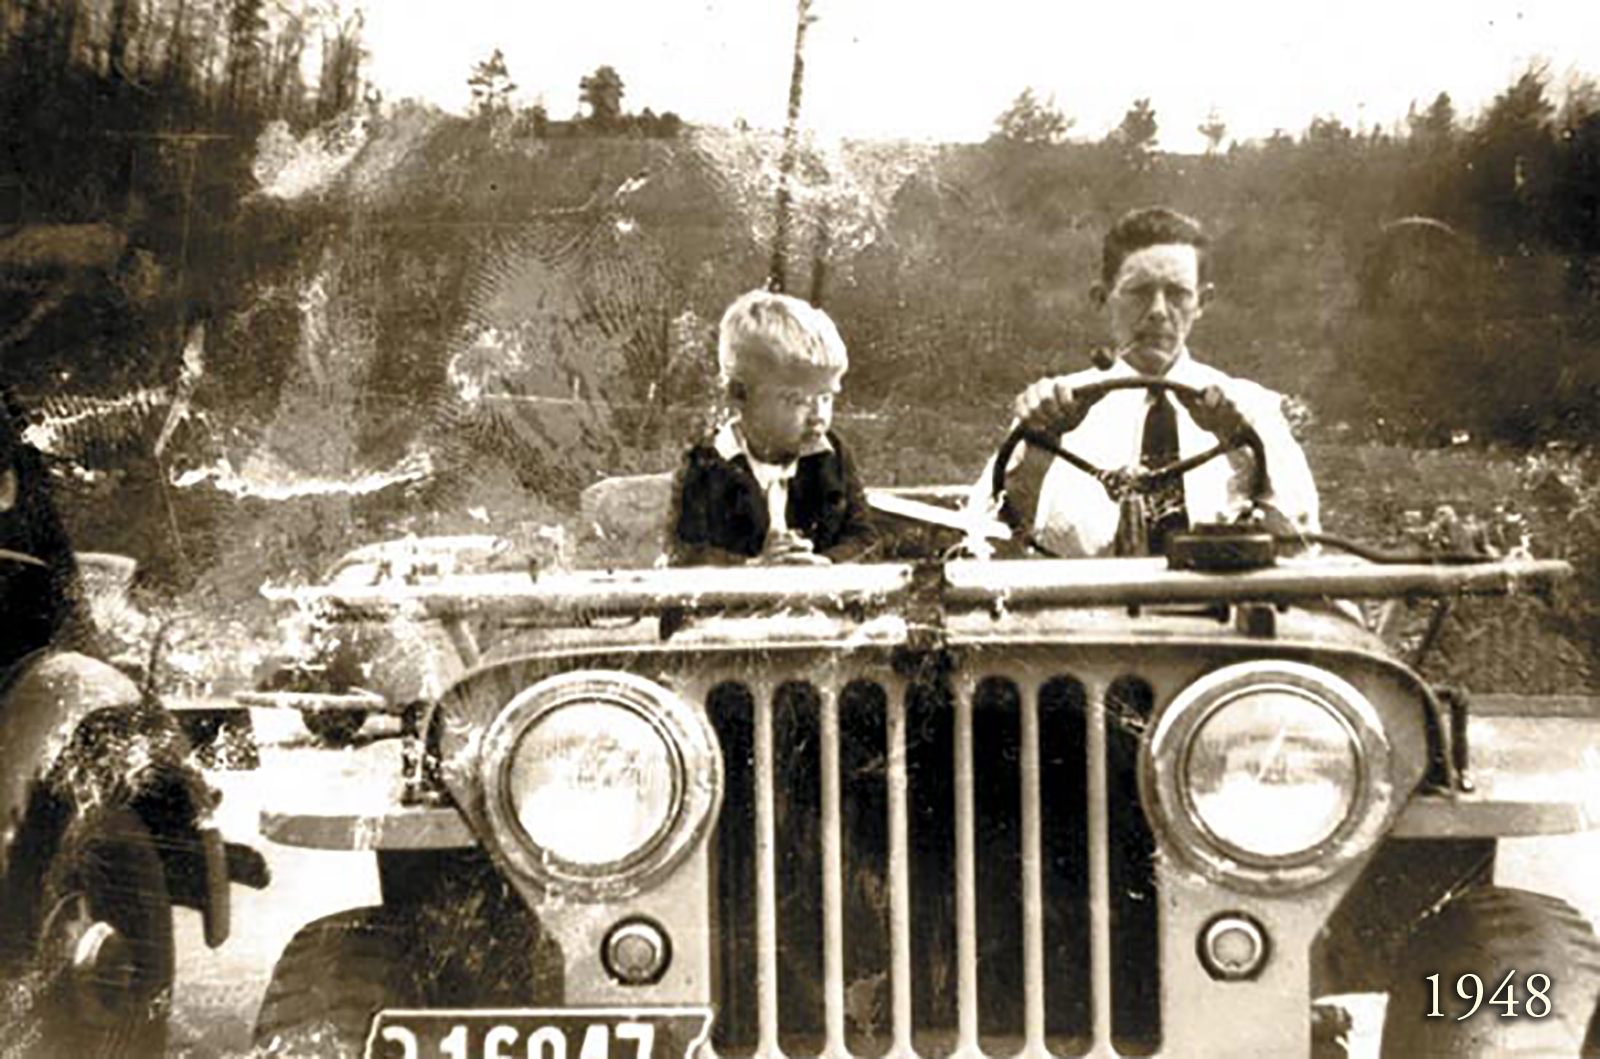 Sepia toned image of a young Colonel Littleton riding in an old jeep with his dad in 1948